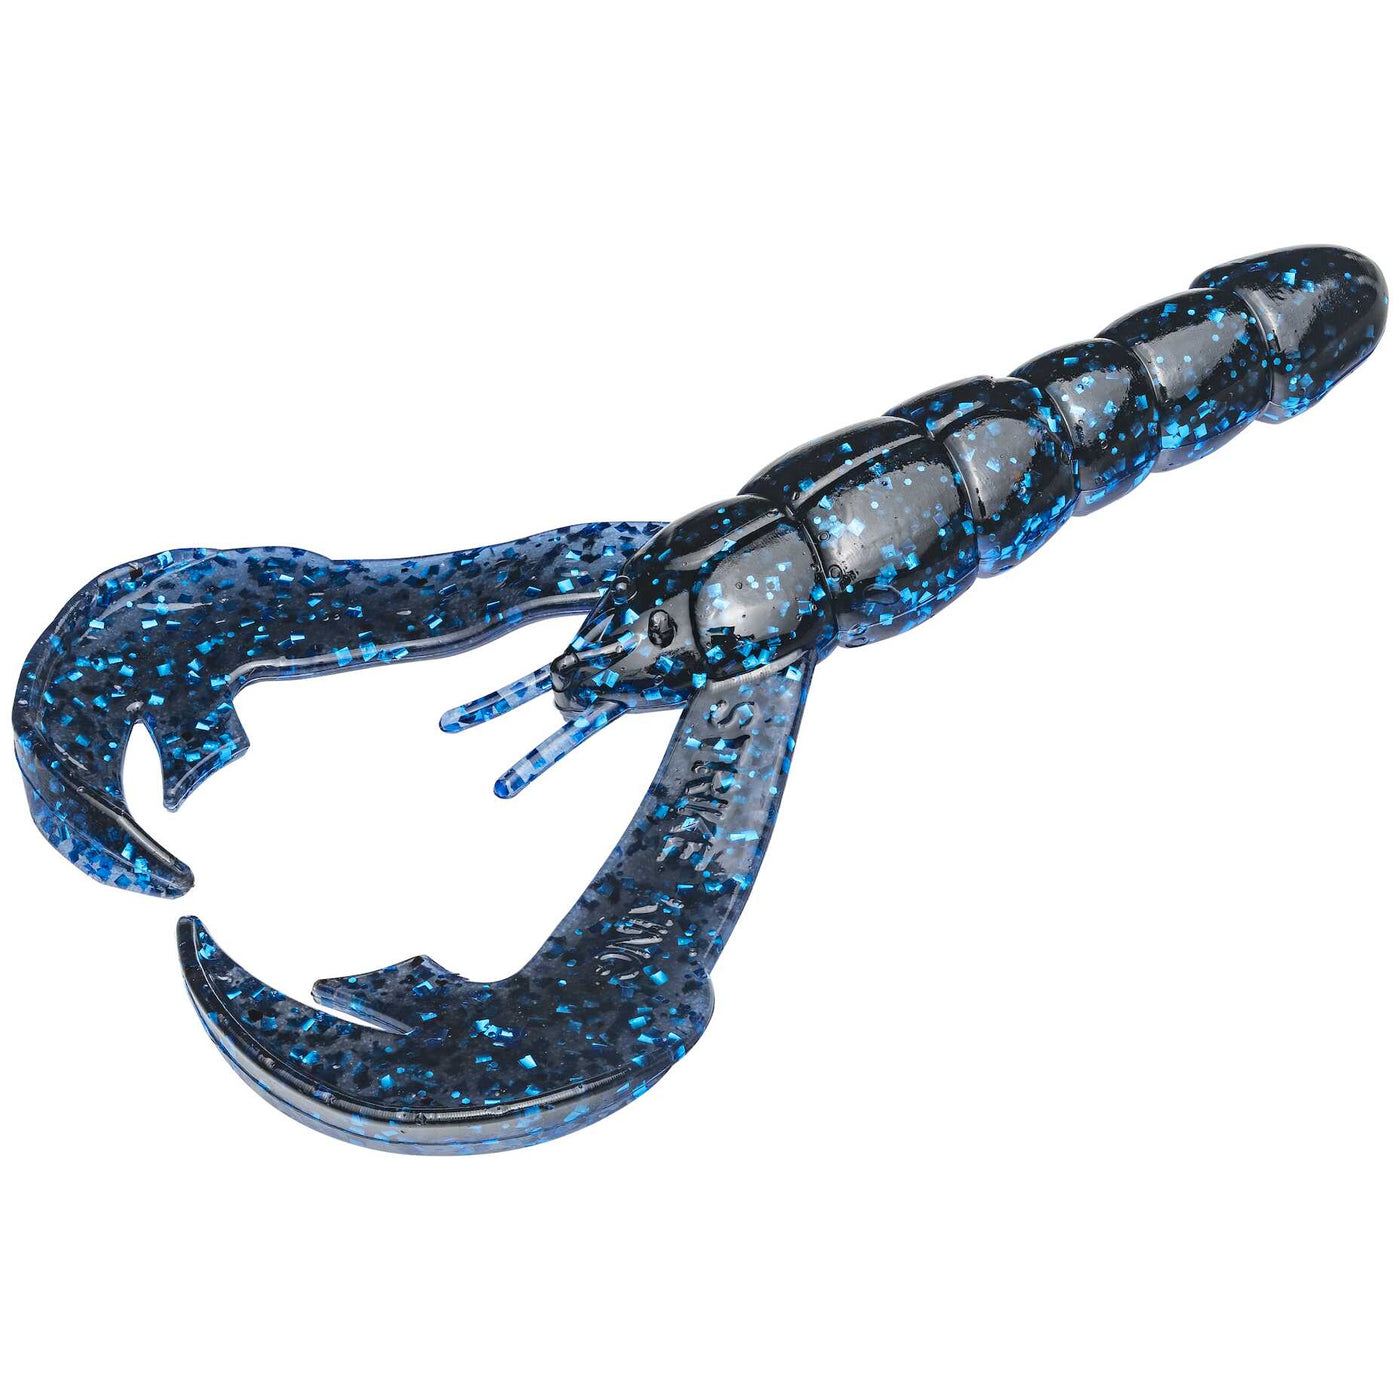 Rage Tail Craw Lure Strike King Lure Company 4 in Blue Bug 